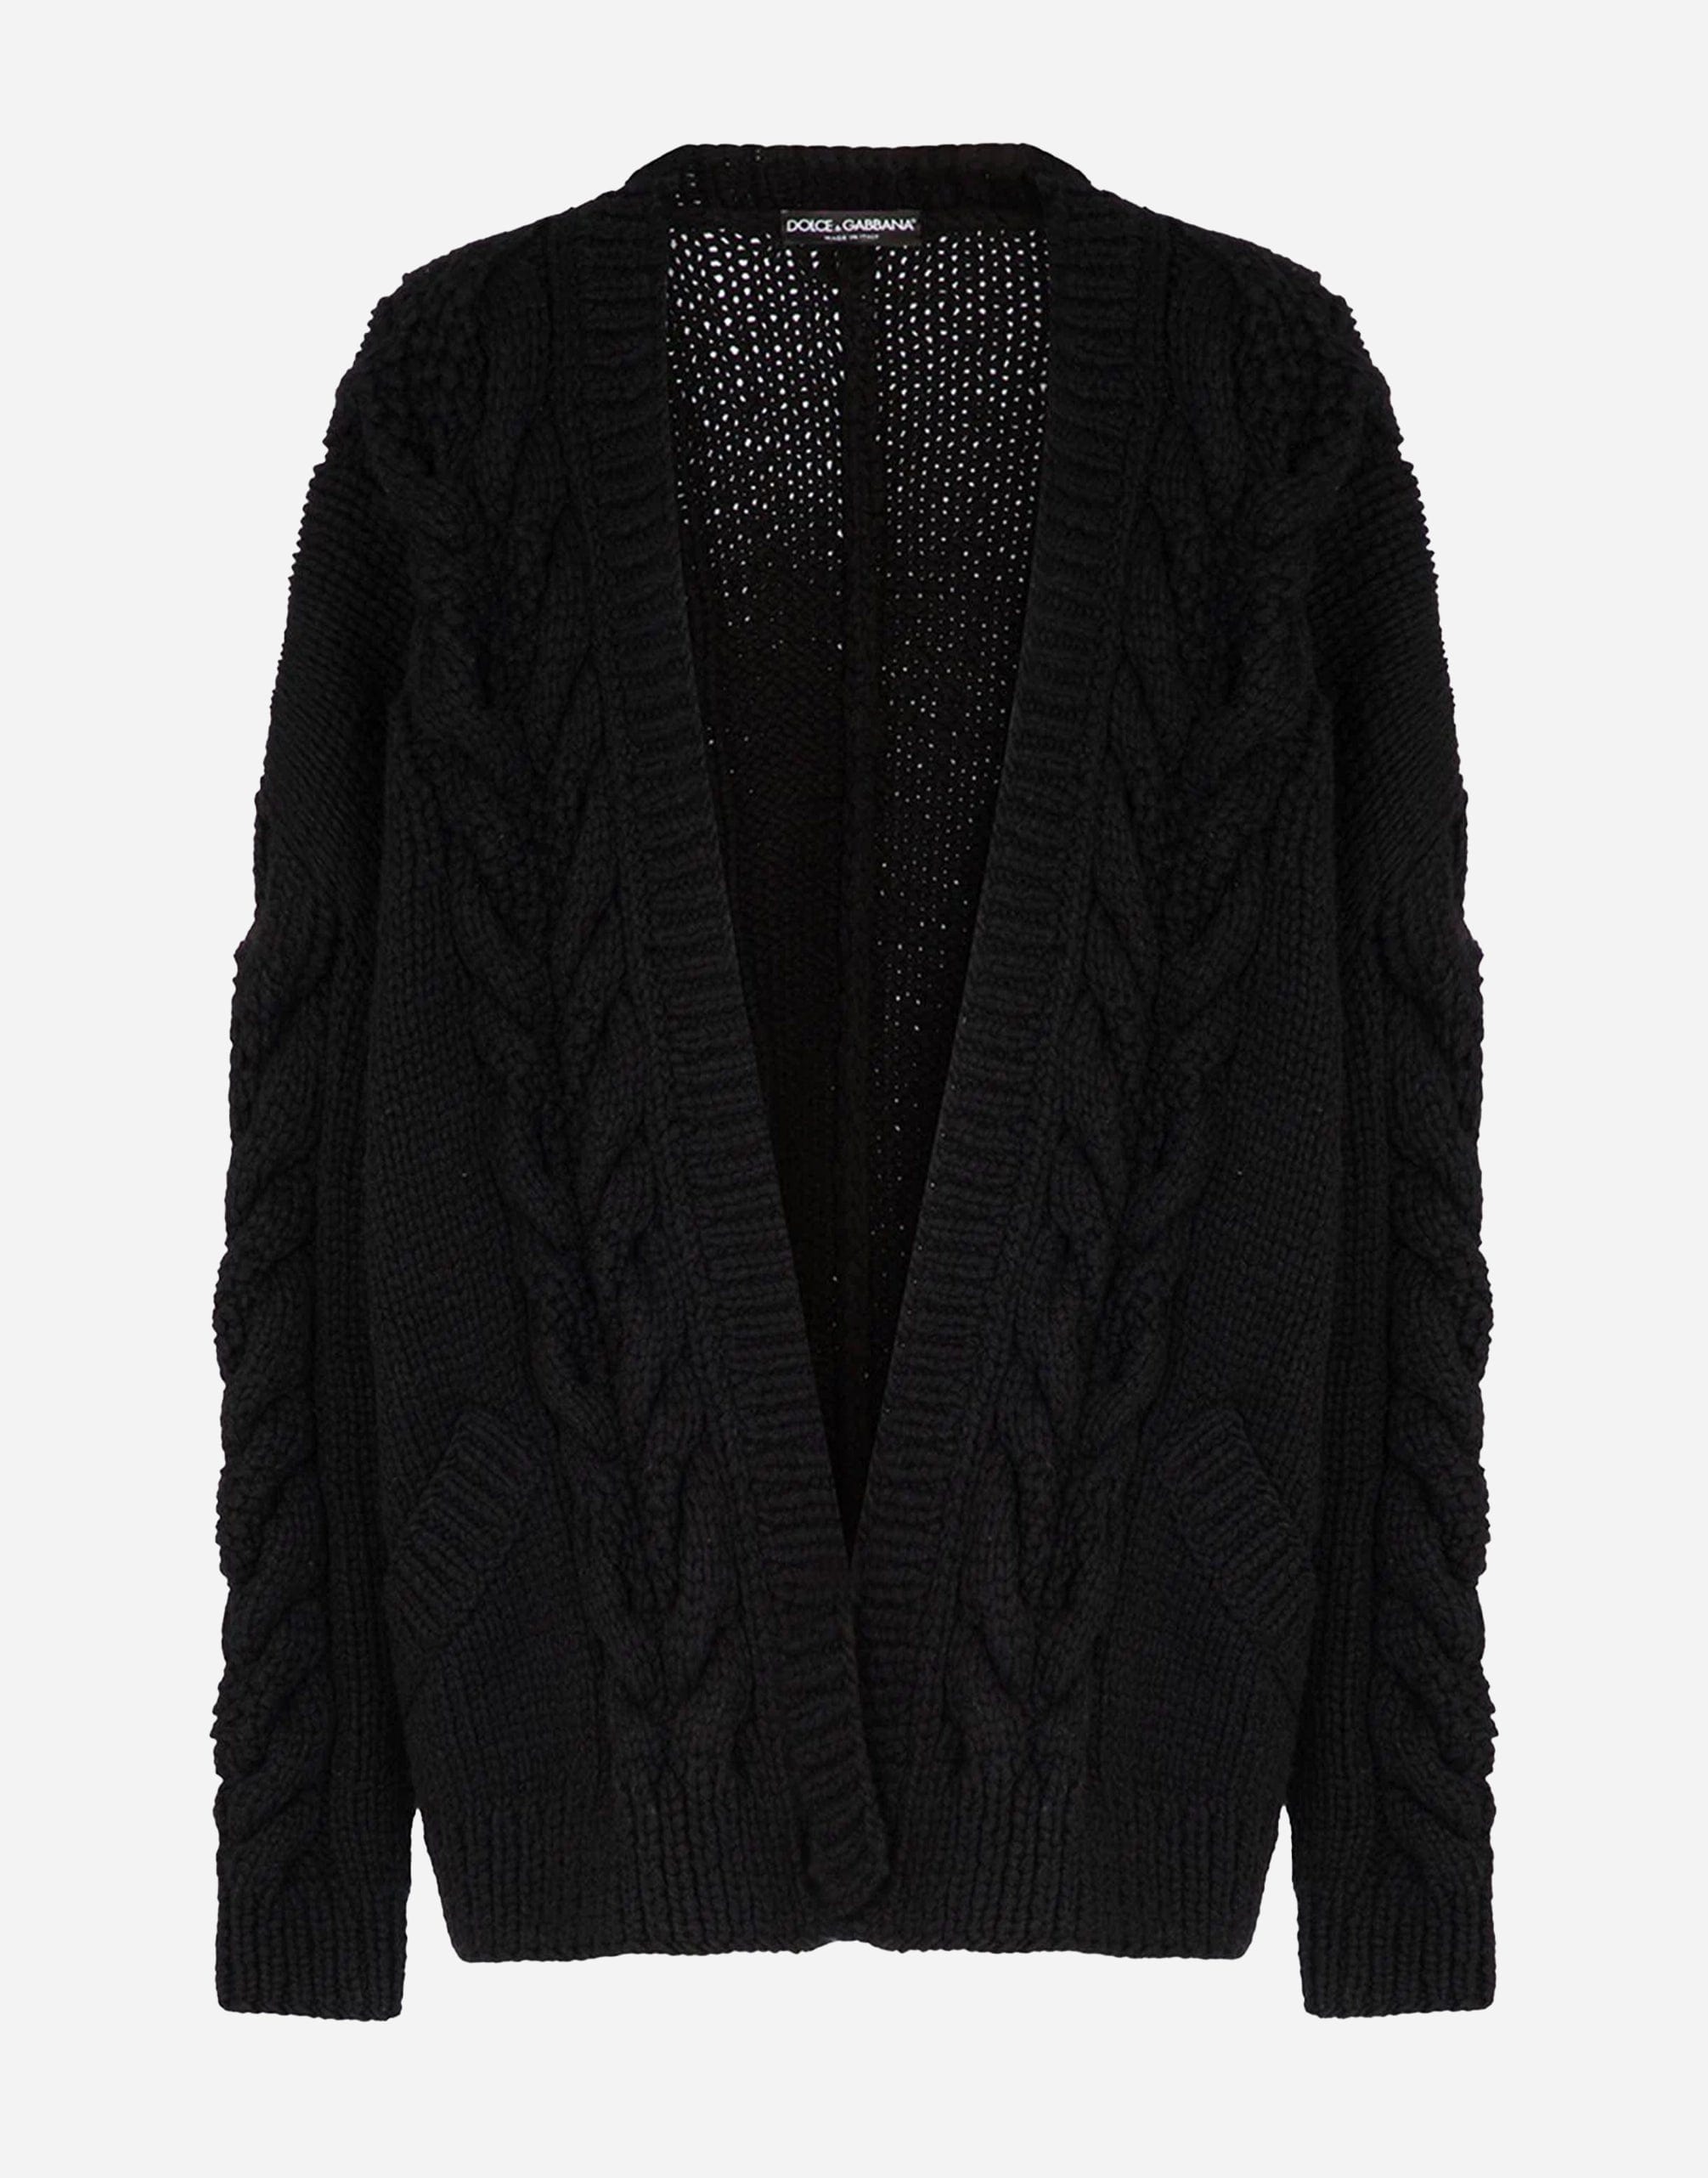 Long-Sleeved Wool And Cashmere Cardigan